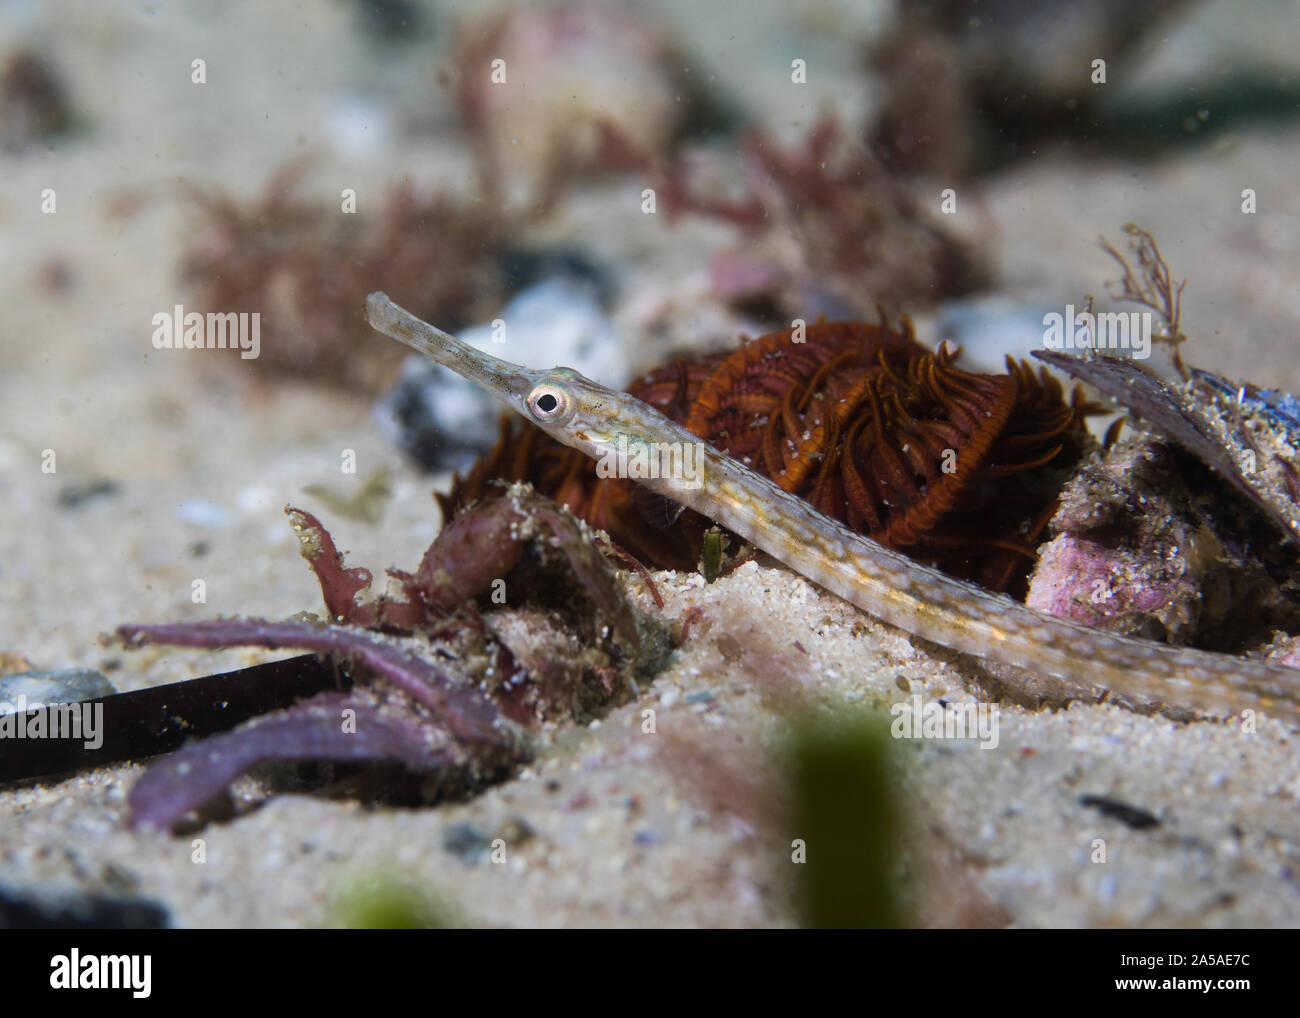 Longsnout pipefish (Syngnathus temminckii) on the ocean floor side view. Stock Photo